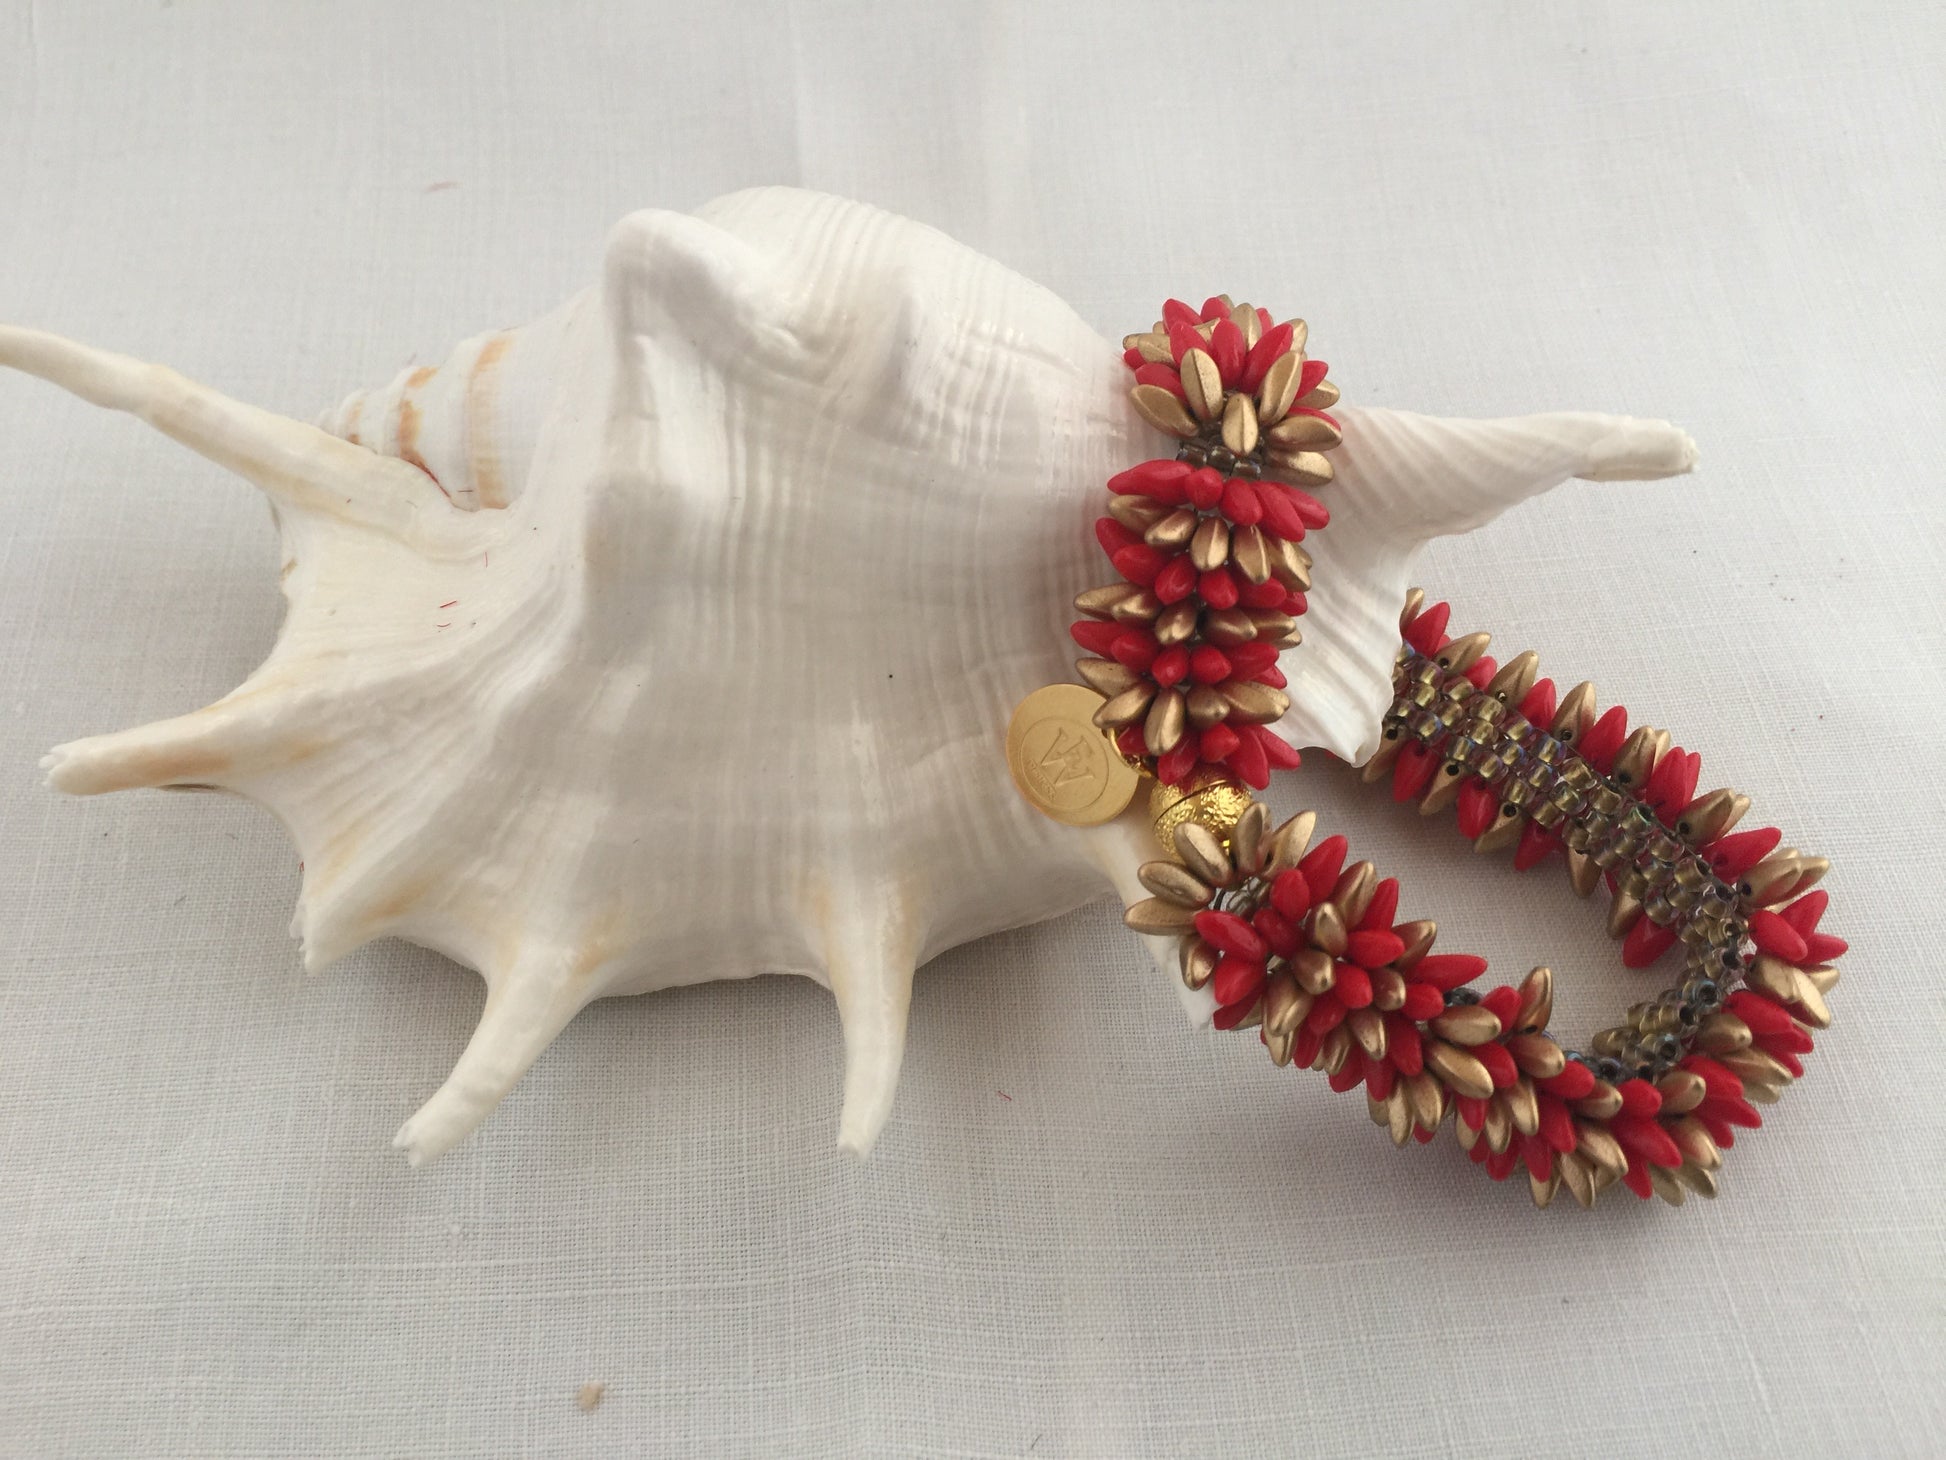 Gold and red caterpillar bracelet